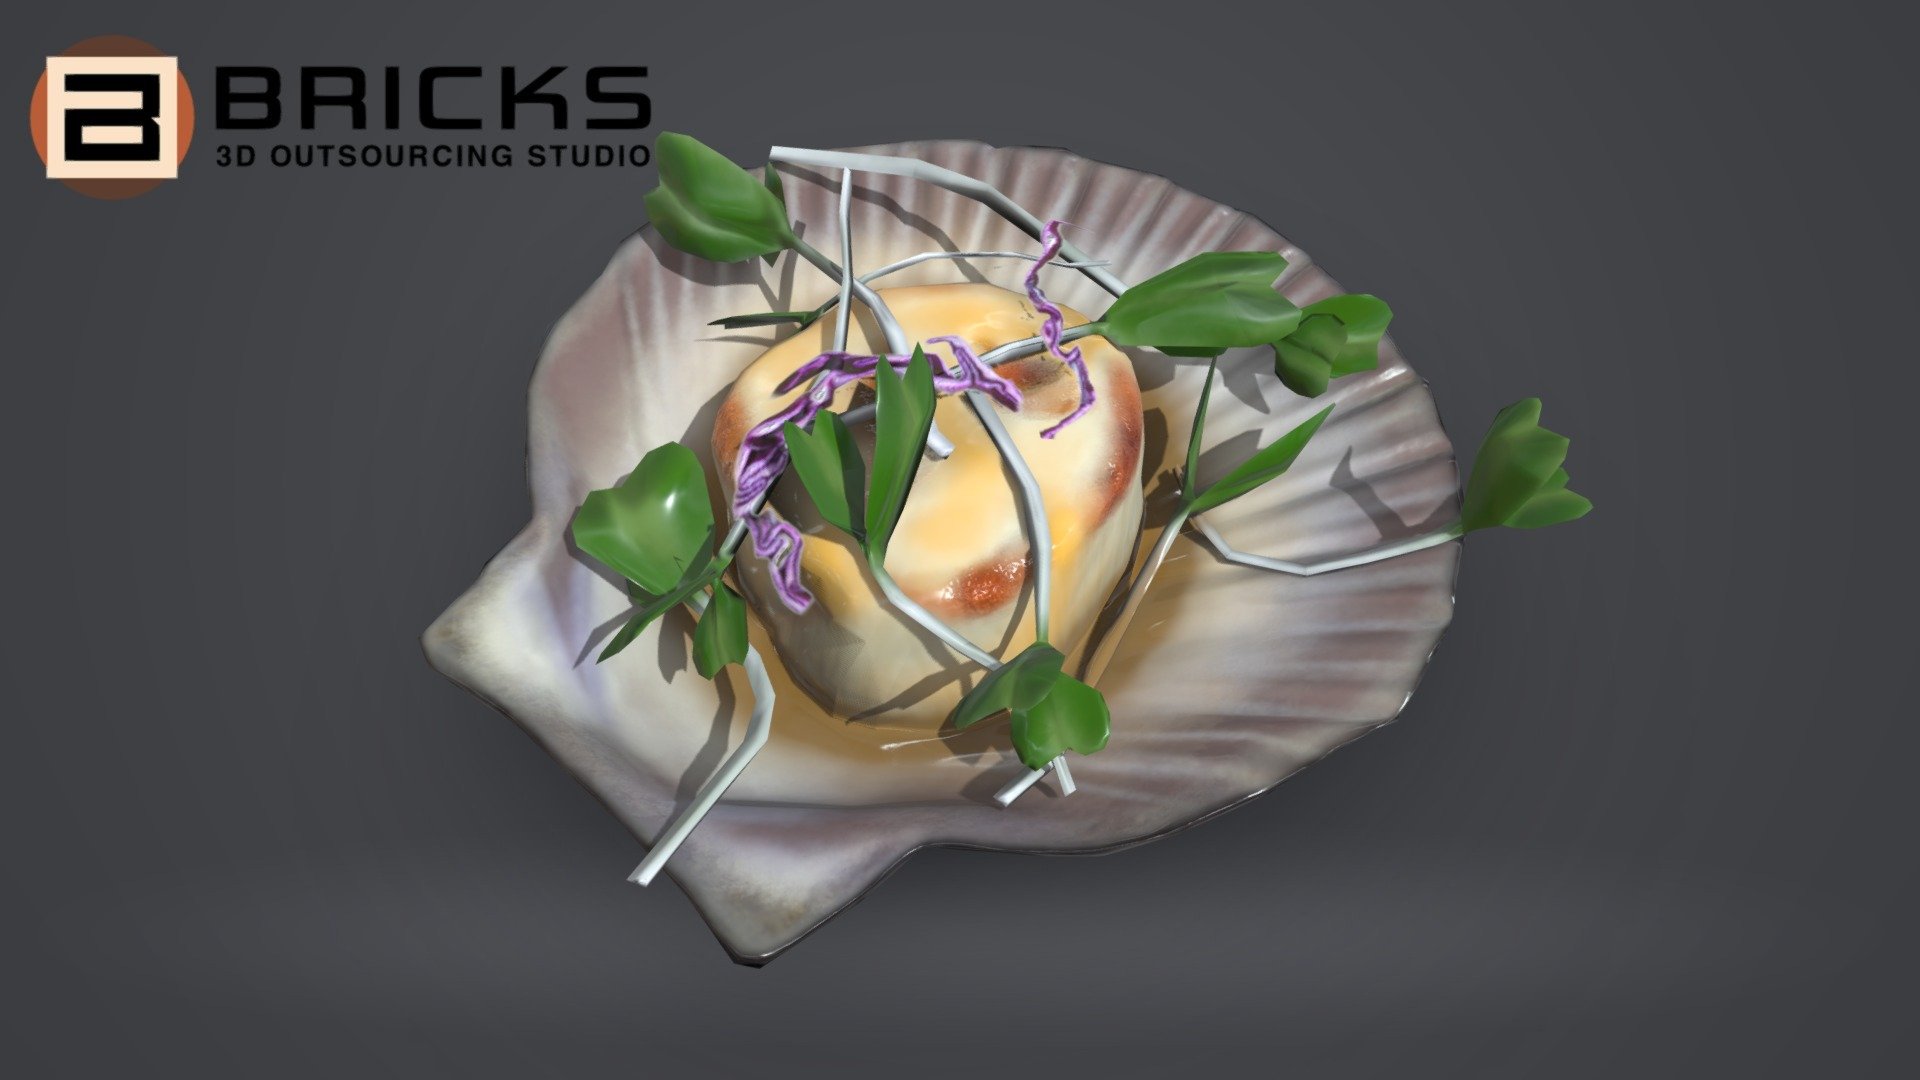 PBR Food Asset:
ScallopCitrusSprouts
Polycount: 1886
Vertex count: 979
Texture Size: 1024px x 1024px
Normal: OpenGL

If you need any adjust in file please contact us: team@bricks3dstudio.com

Hire us: tringuyen@bricks3dstudio.com
Here is us: https://www.bricks3dstudio.com/
        https://www.artstation.com/bricksstudio
        https://www.facebook.com/Bricks3dstudio/
        https://www.linkedin.com/in/bricks-studio-b10462252/ - ScallopCitrusSprouts - Buy Royalty Free 3D model by Bricks Studio (@bricks3dstudio) 3d model